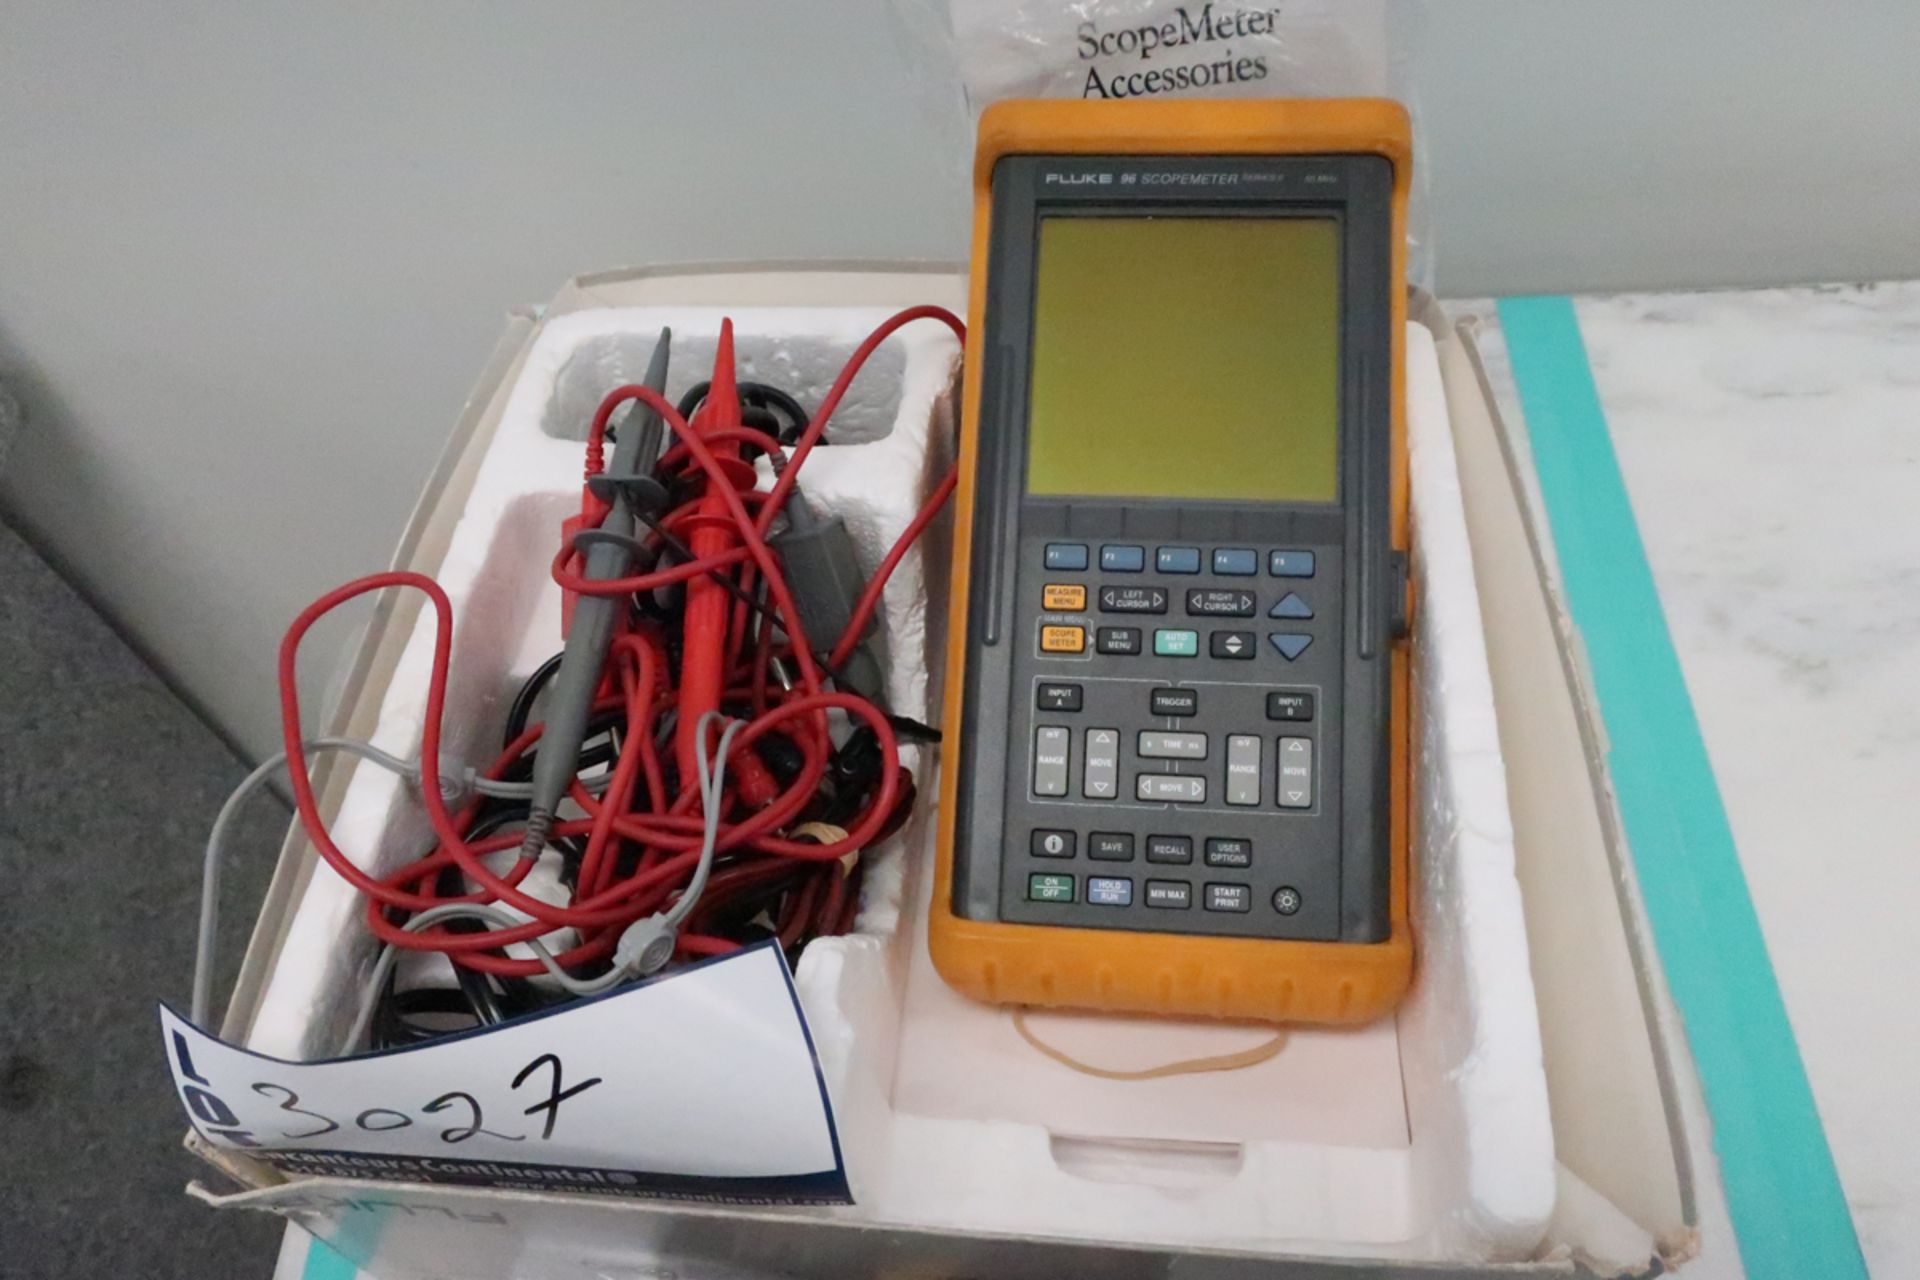 FLUKE SCOPE METER 96 ** NOT PART OF THE BULK BID, CONDITIONAL TO CREDITOR'S APPROVAL *** - Image 2 of 2